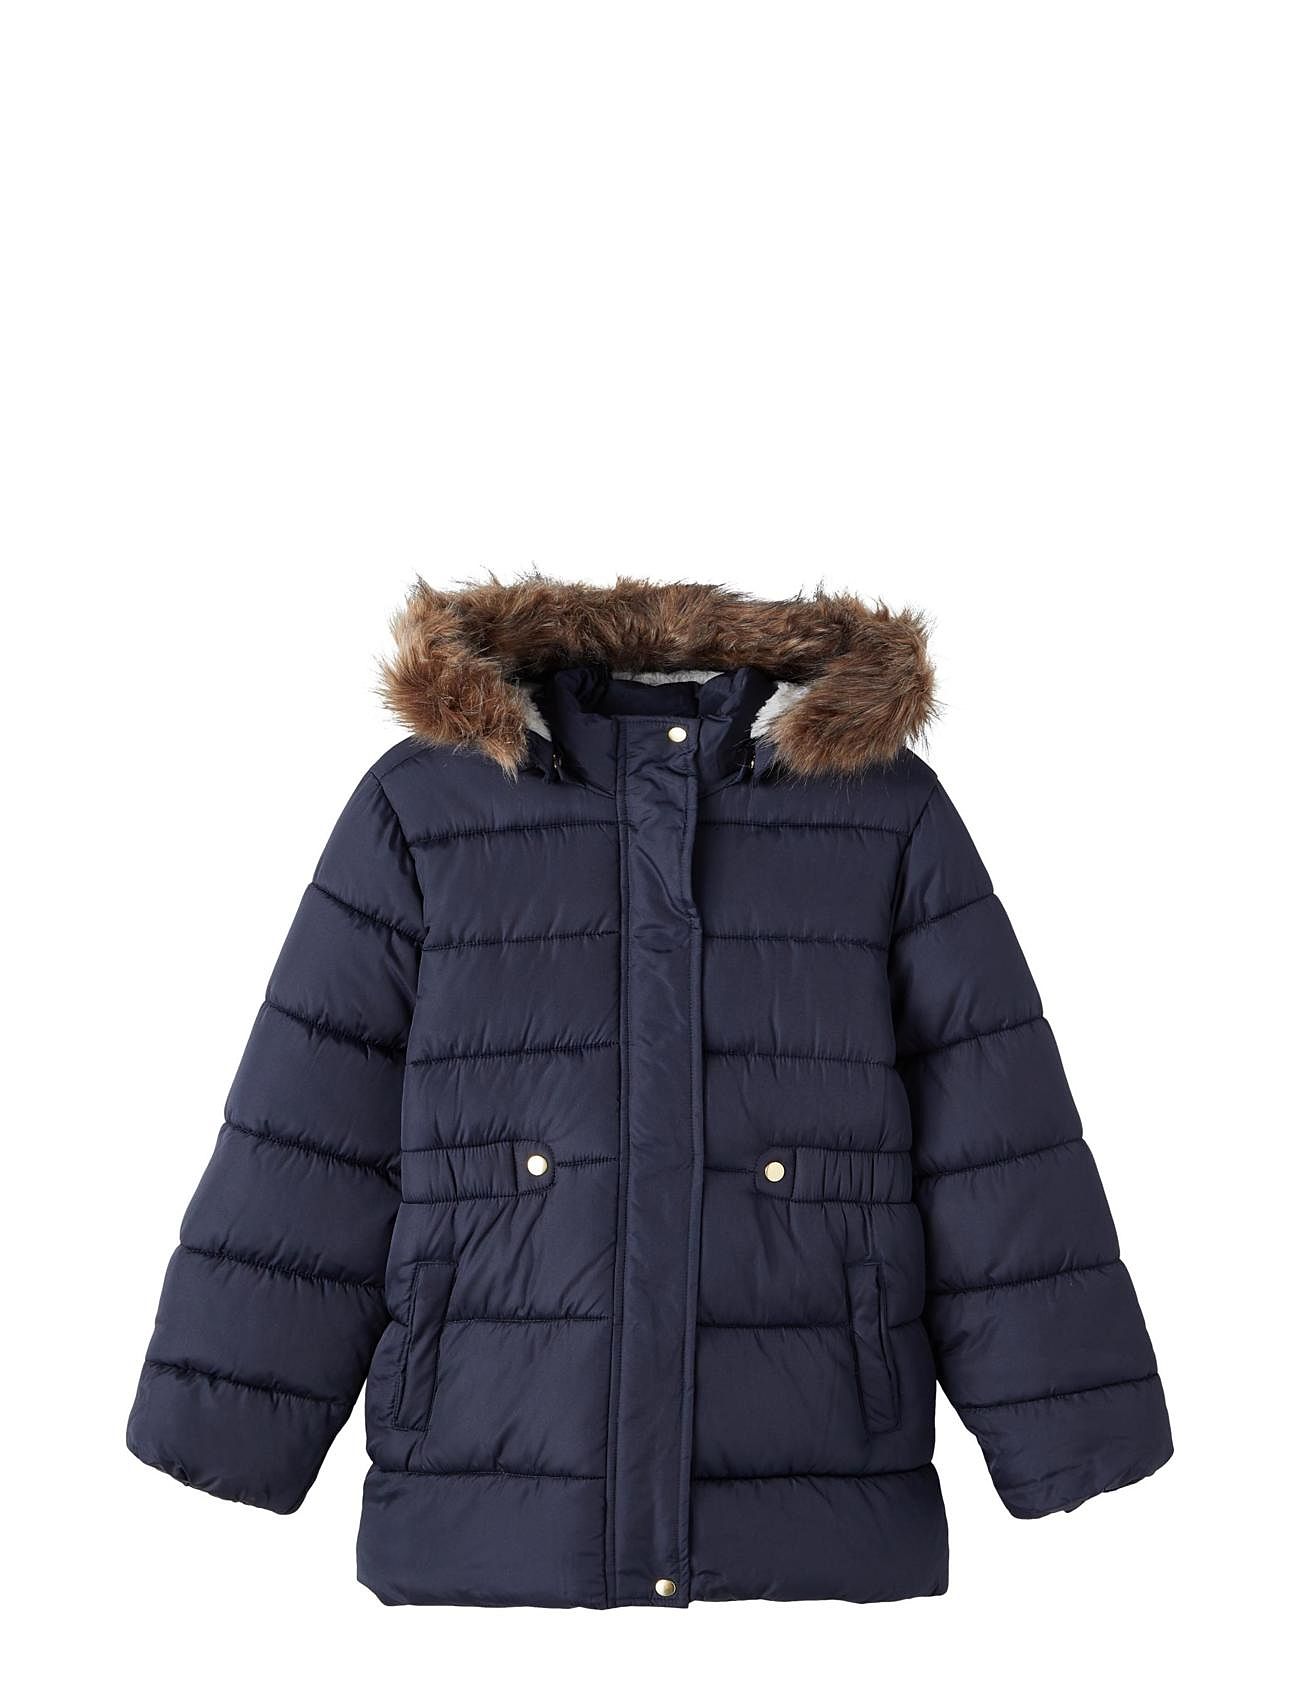 Noos Boozt.com. at - Jacket2 Puffer and easy name Buy Padded €. & delivery it returns 30.00 Nkfmerethe online Fast it name from